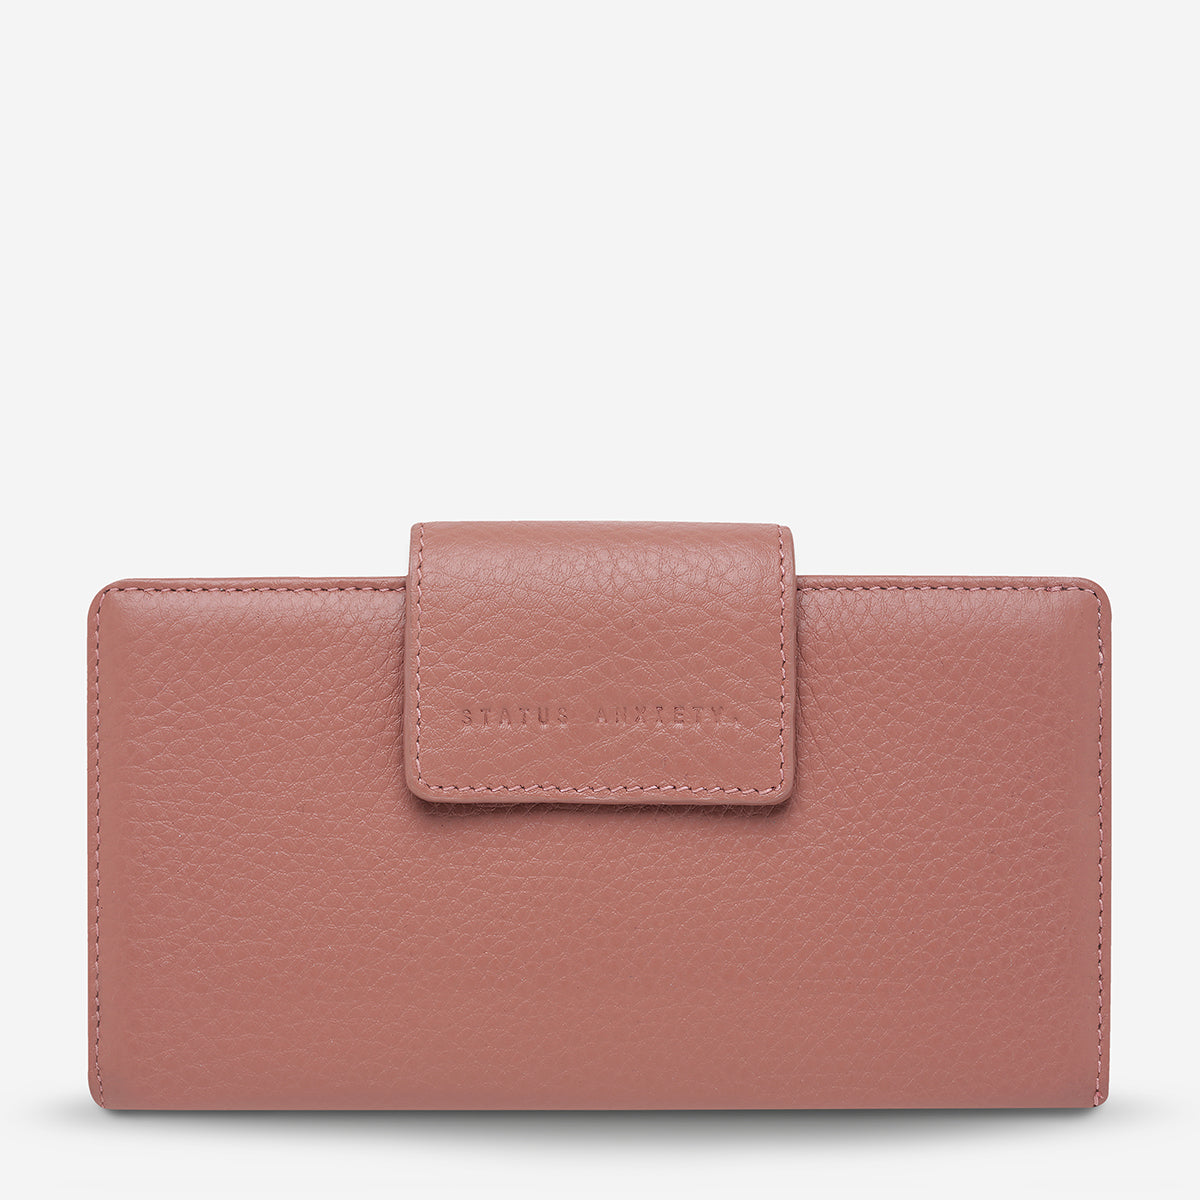 Ruins Leather Wallet - Dusty Rose